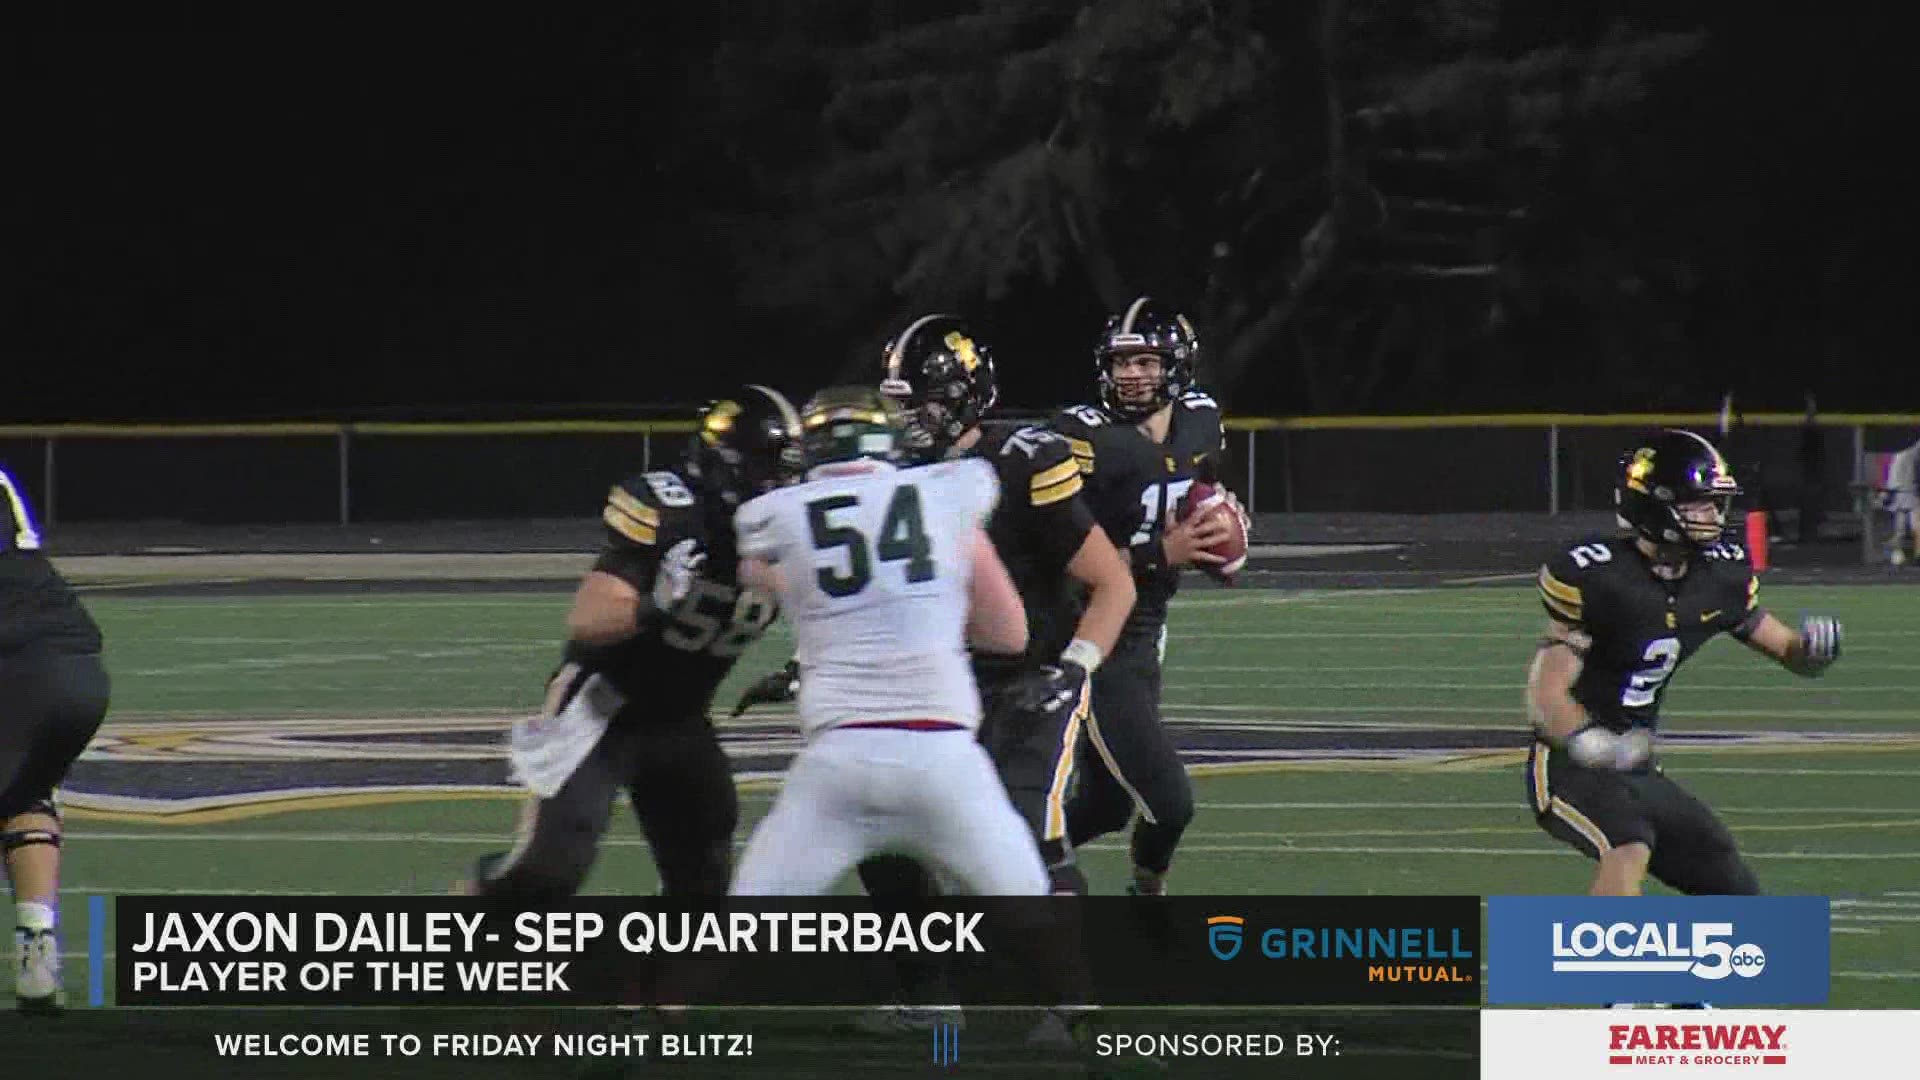 The Rams QB had two rushing touchdowns and two passing touchdowns in a big 48-0 win over Cedar Rapids Kennedy.